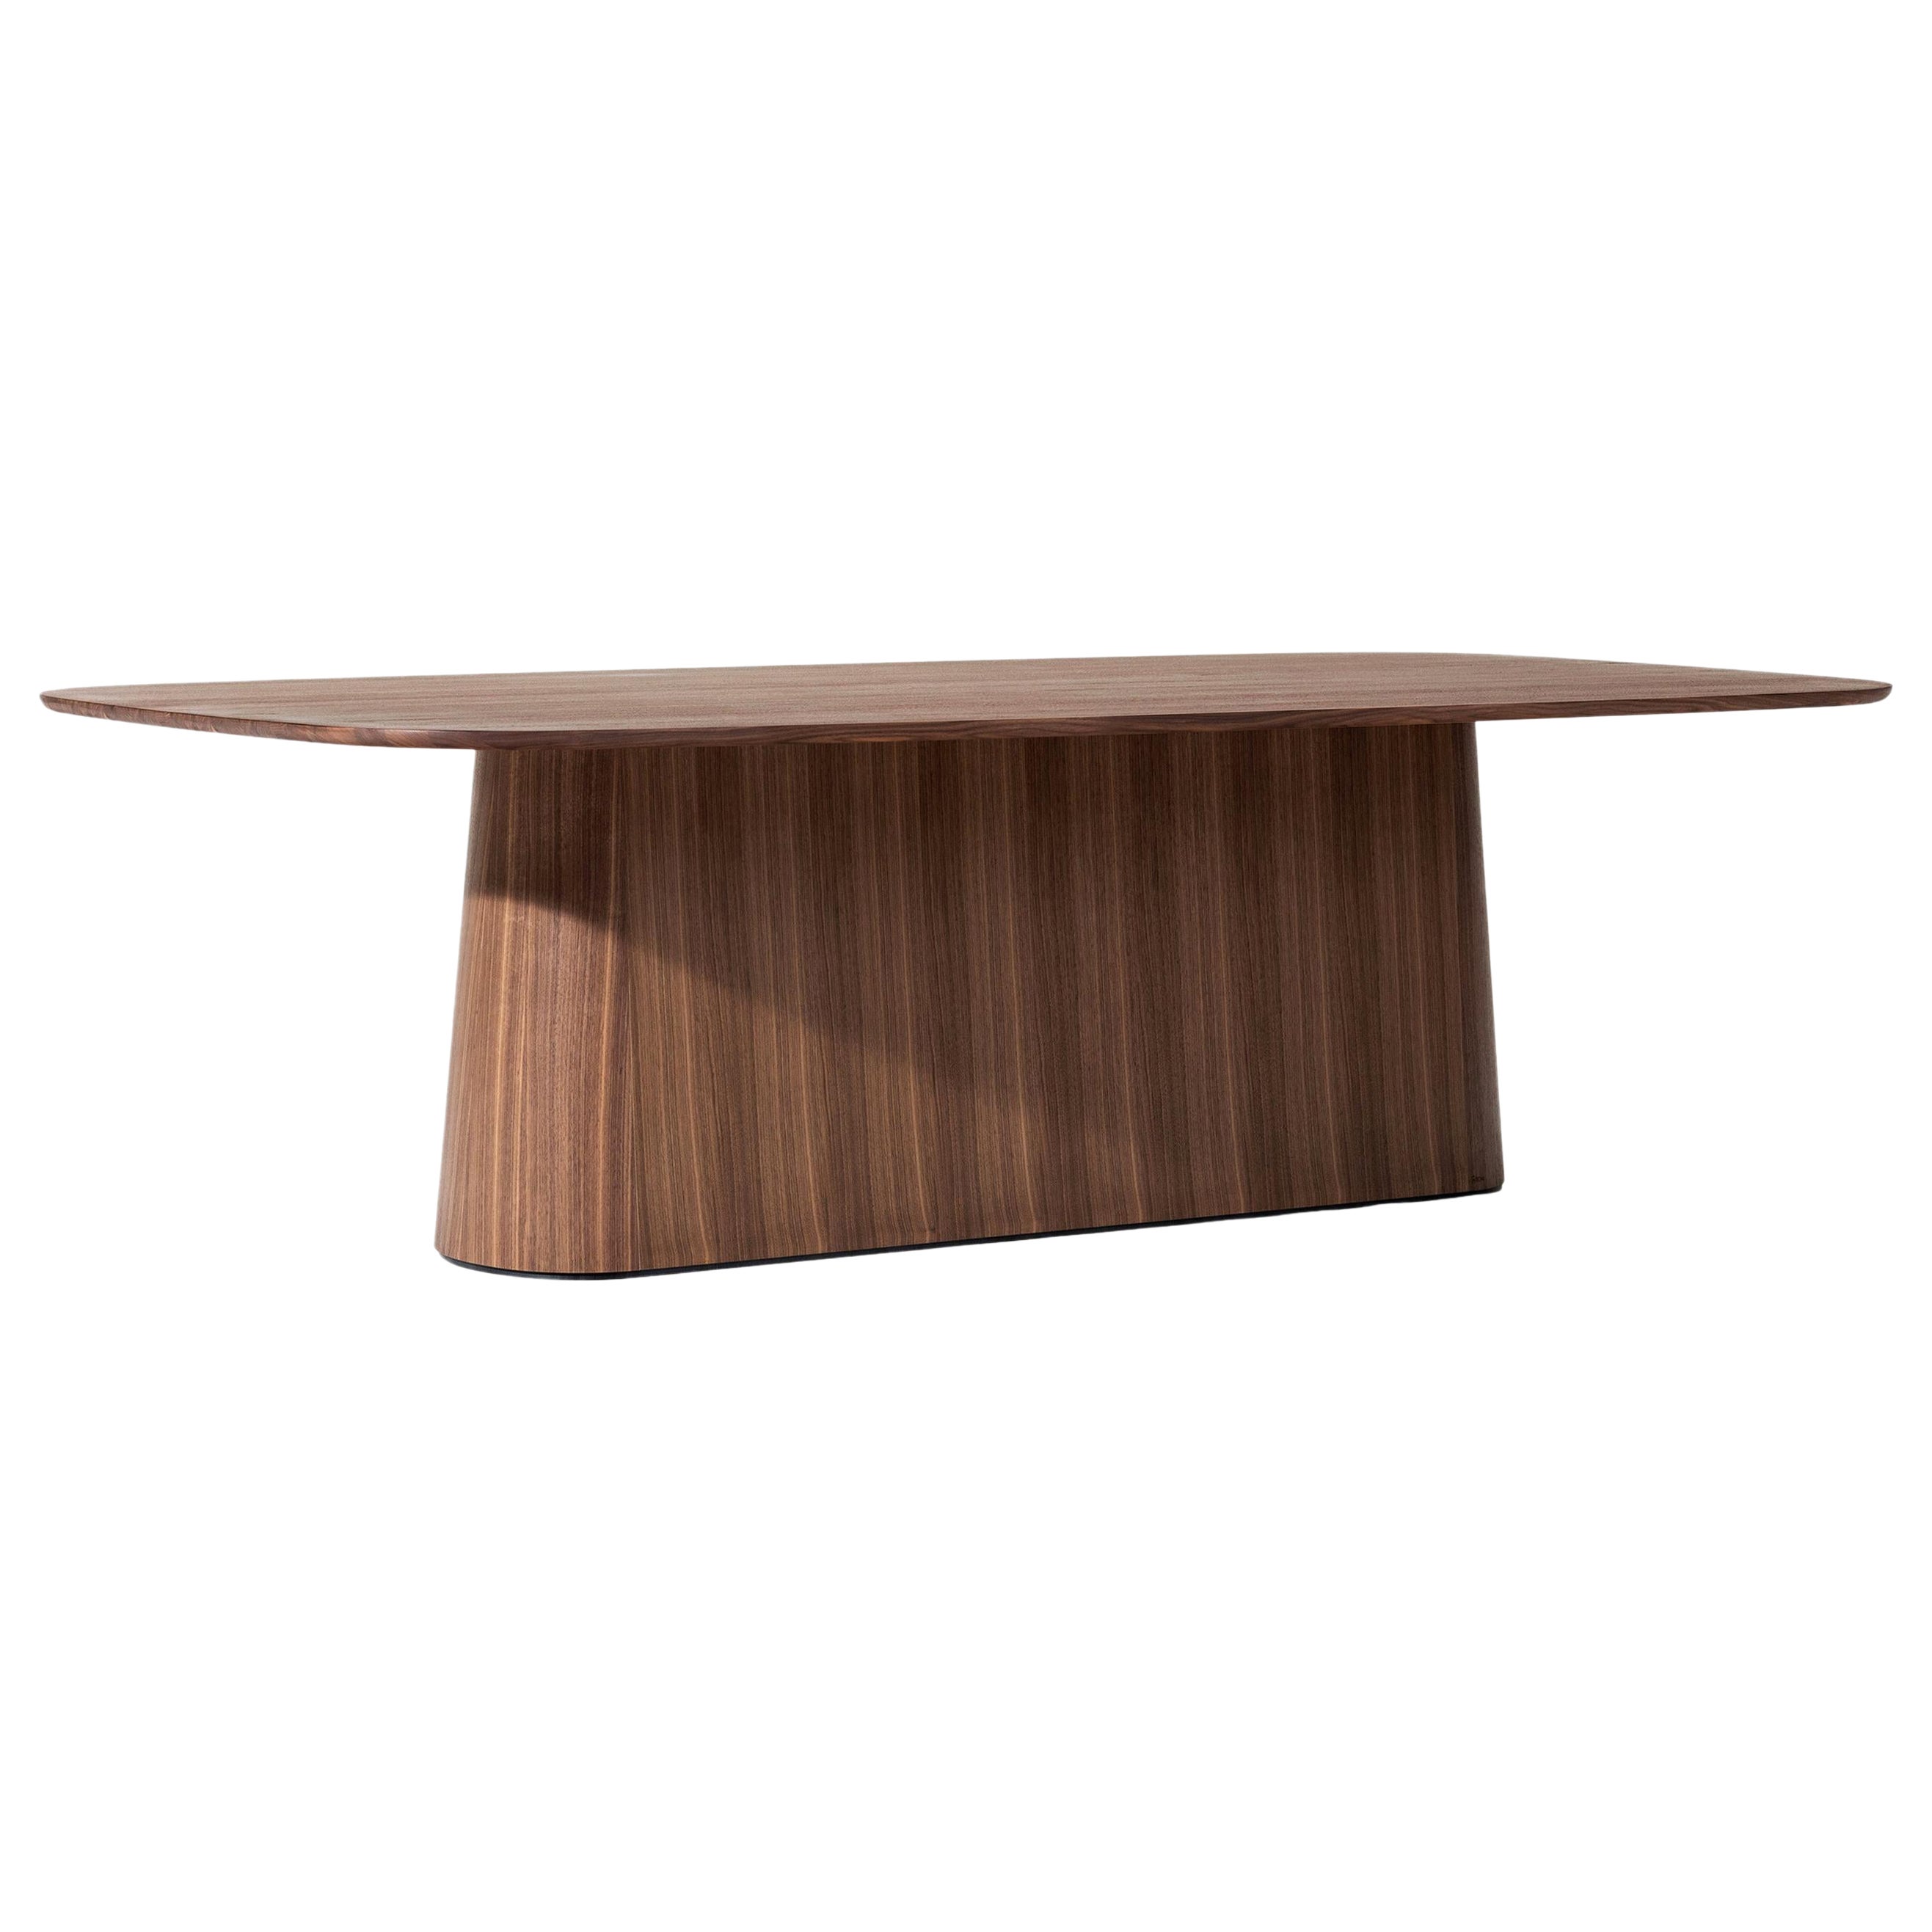 Contemporary Dining Table POV 467, Solid Oak or Walnut, 300